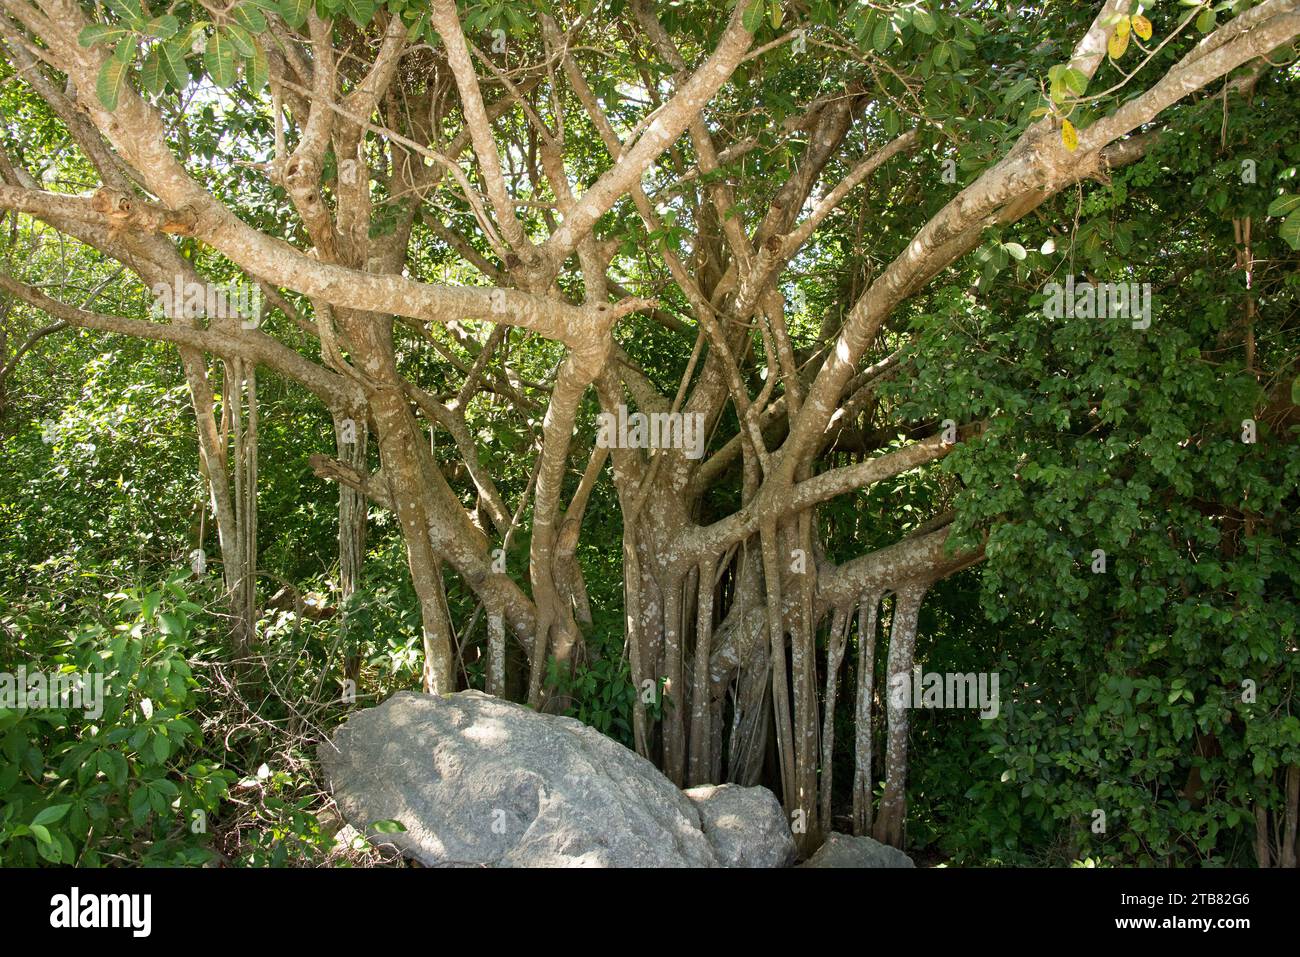 Nacapul (Ficus cotinifolia) is a strangler fig native to mexico and Central America. This photo was taken in Tulum, Yucatan, Mexico. Stock Photo